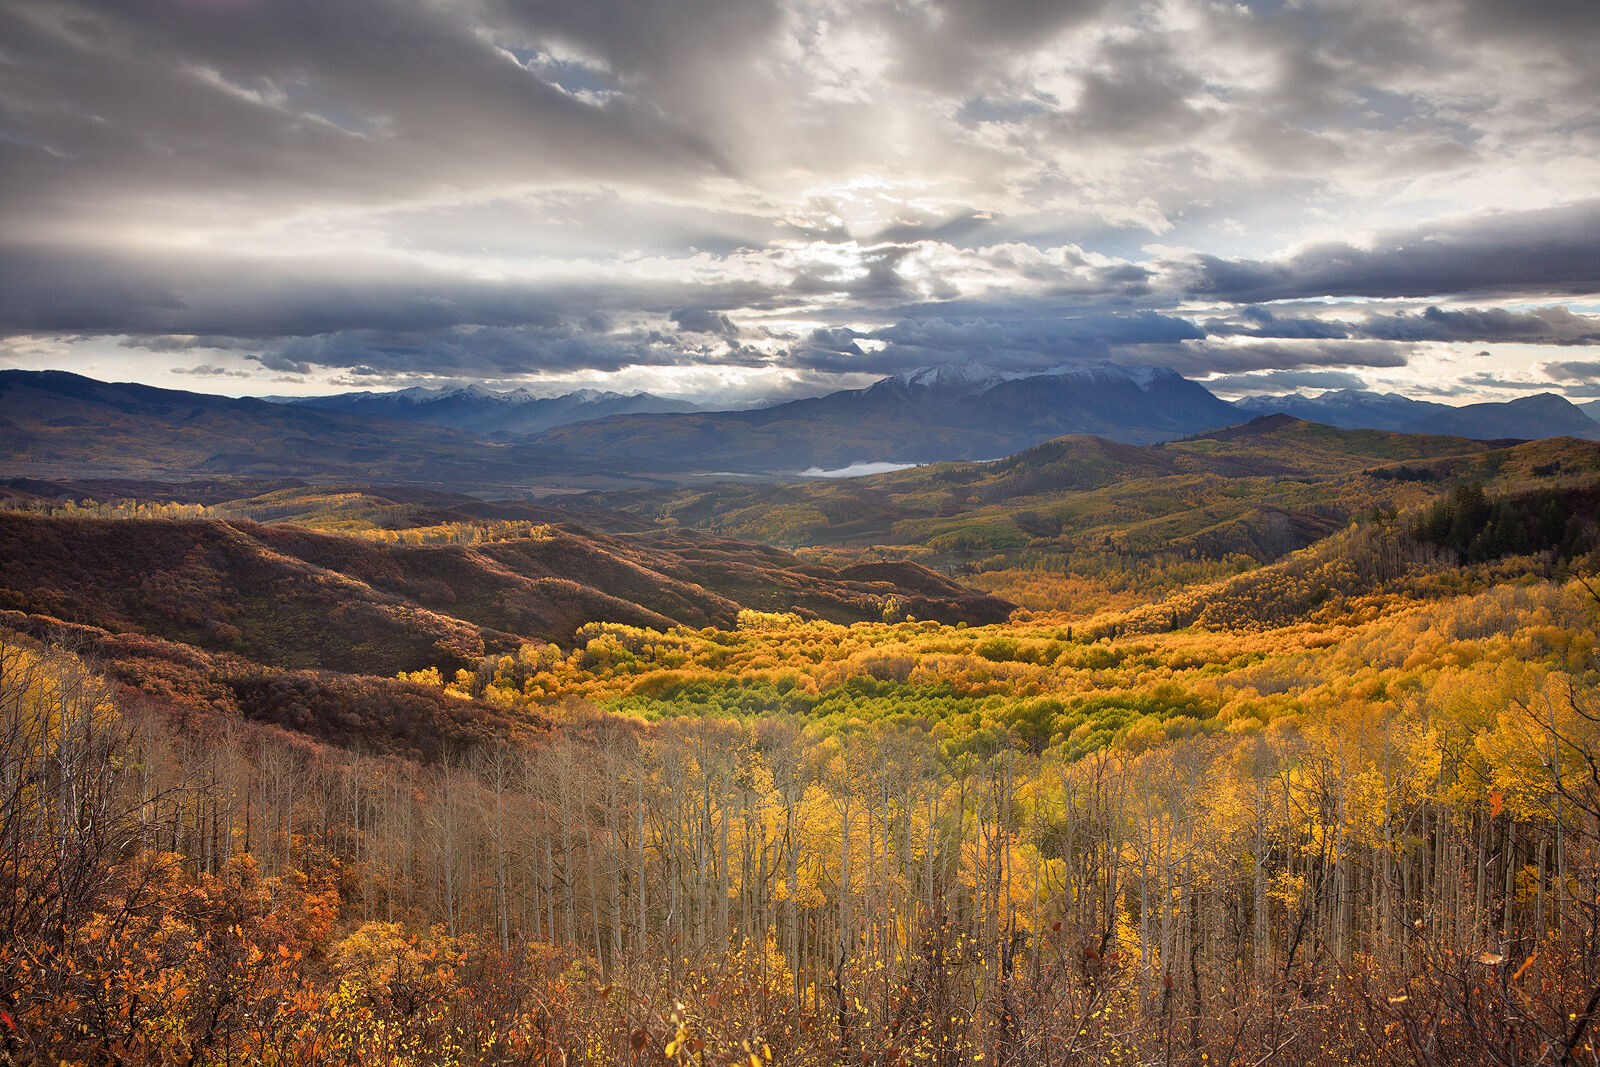 Mountains on the horizon have peaks nearly hidden by clouds and the valley below is full of yellow and orange aspens and some without leaves.